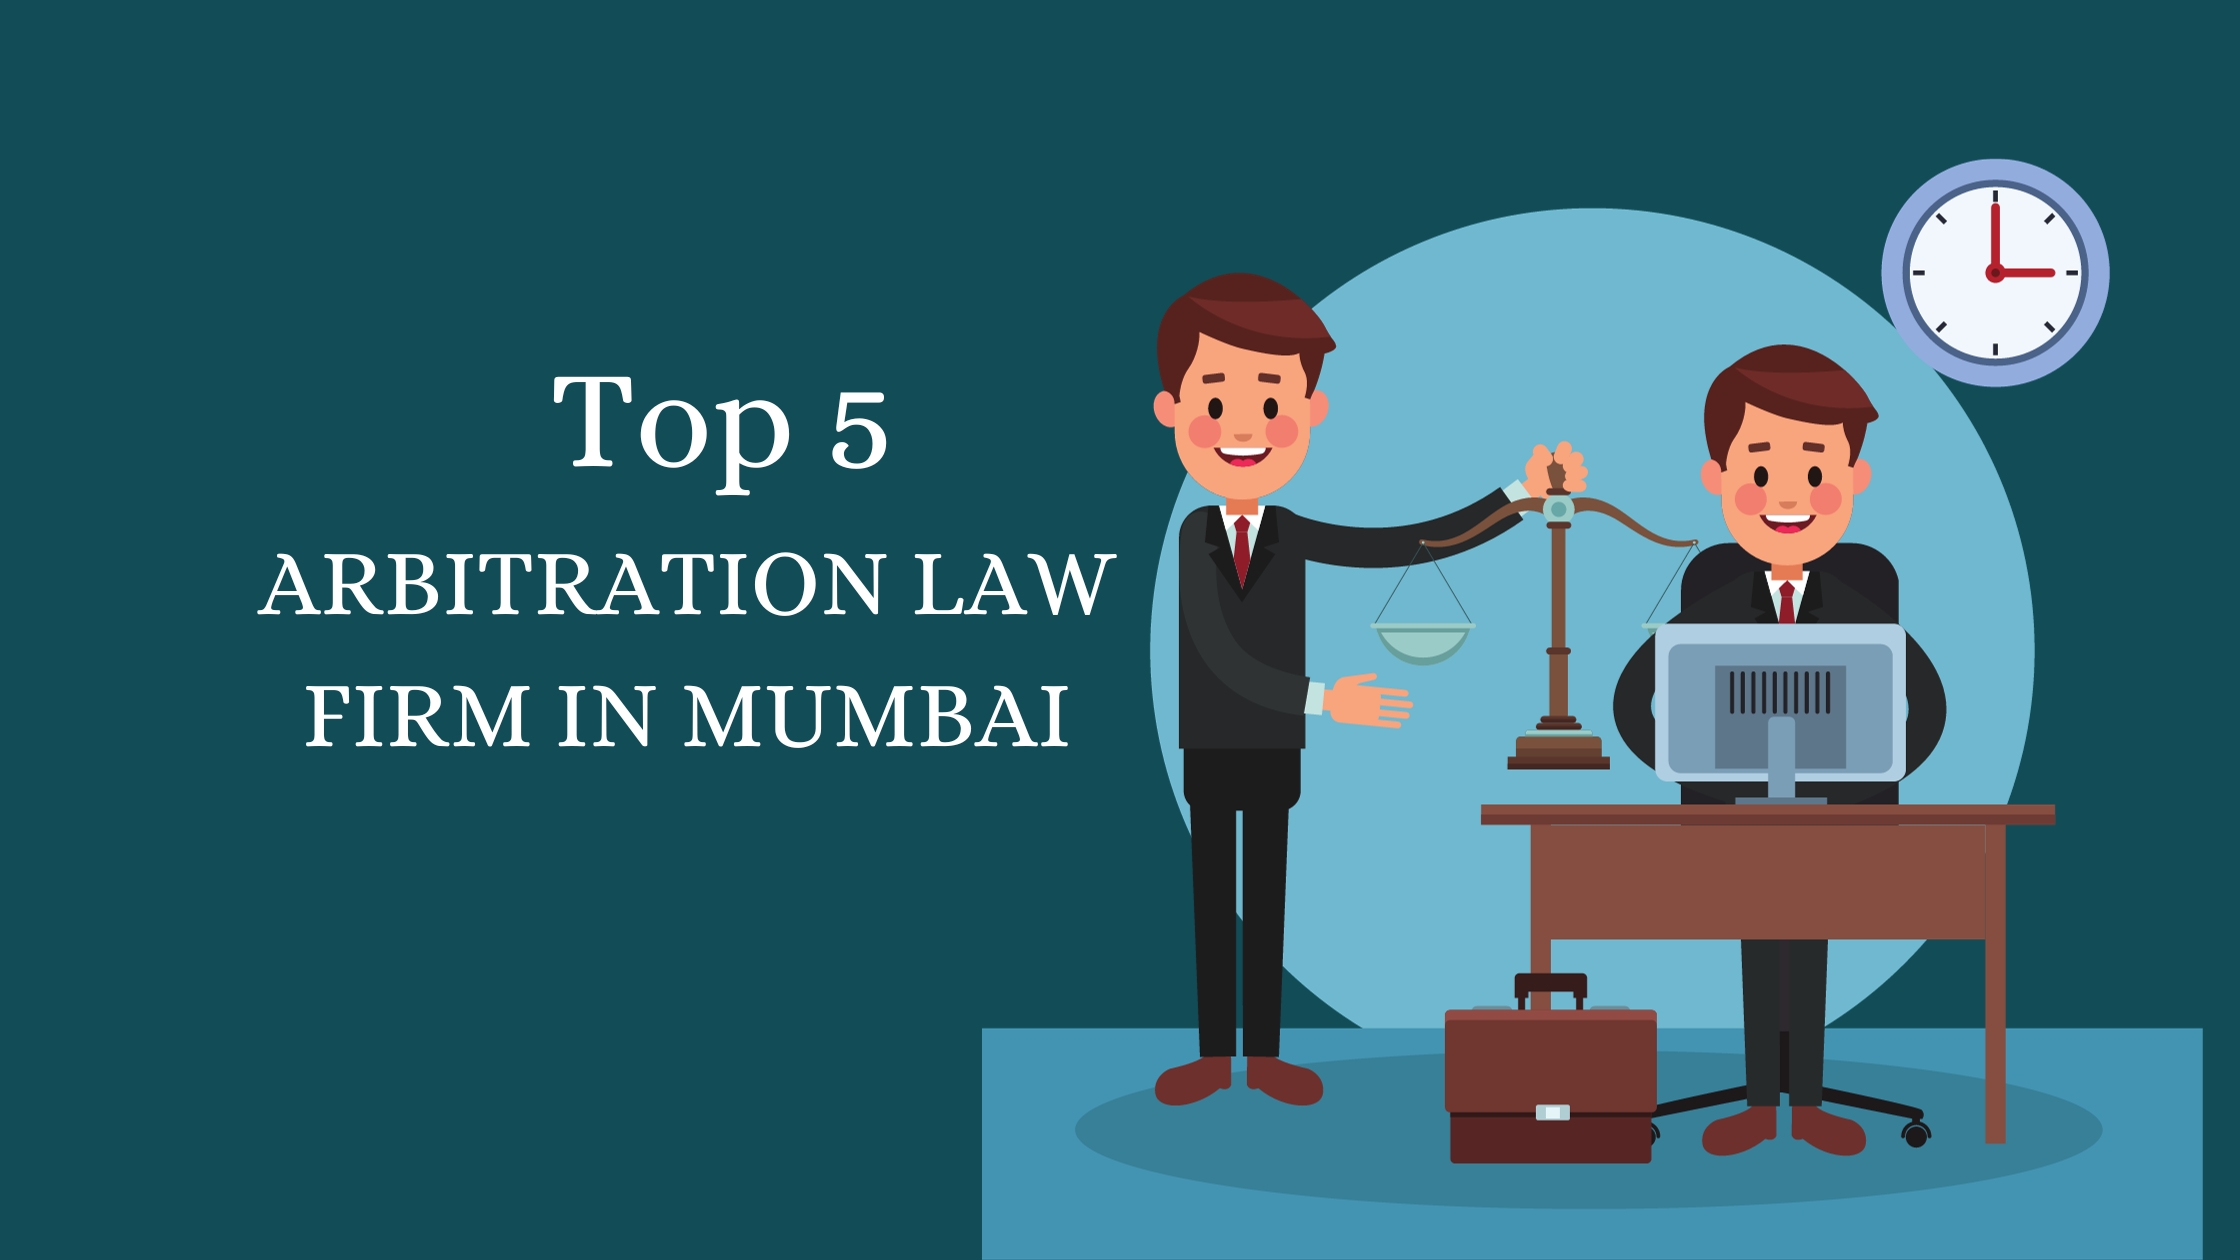 Top 5 arbitration law firm in mumbai